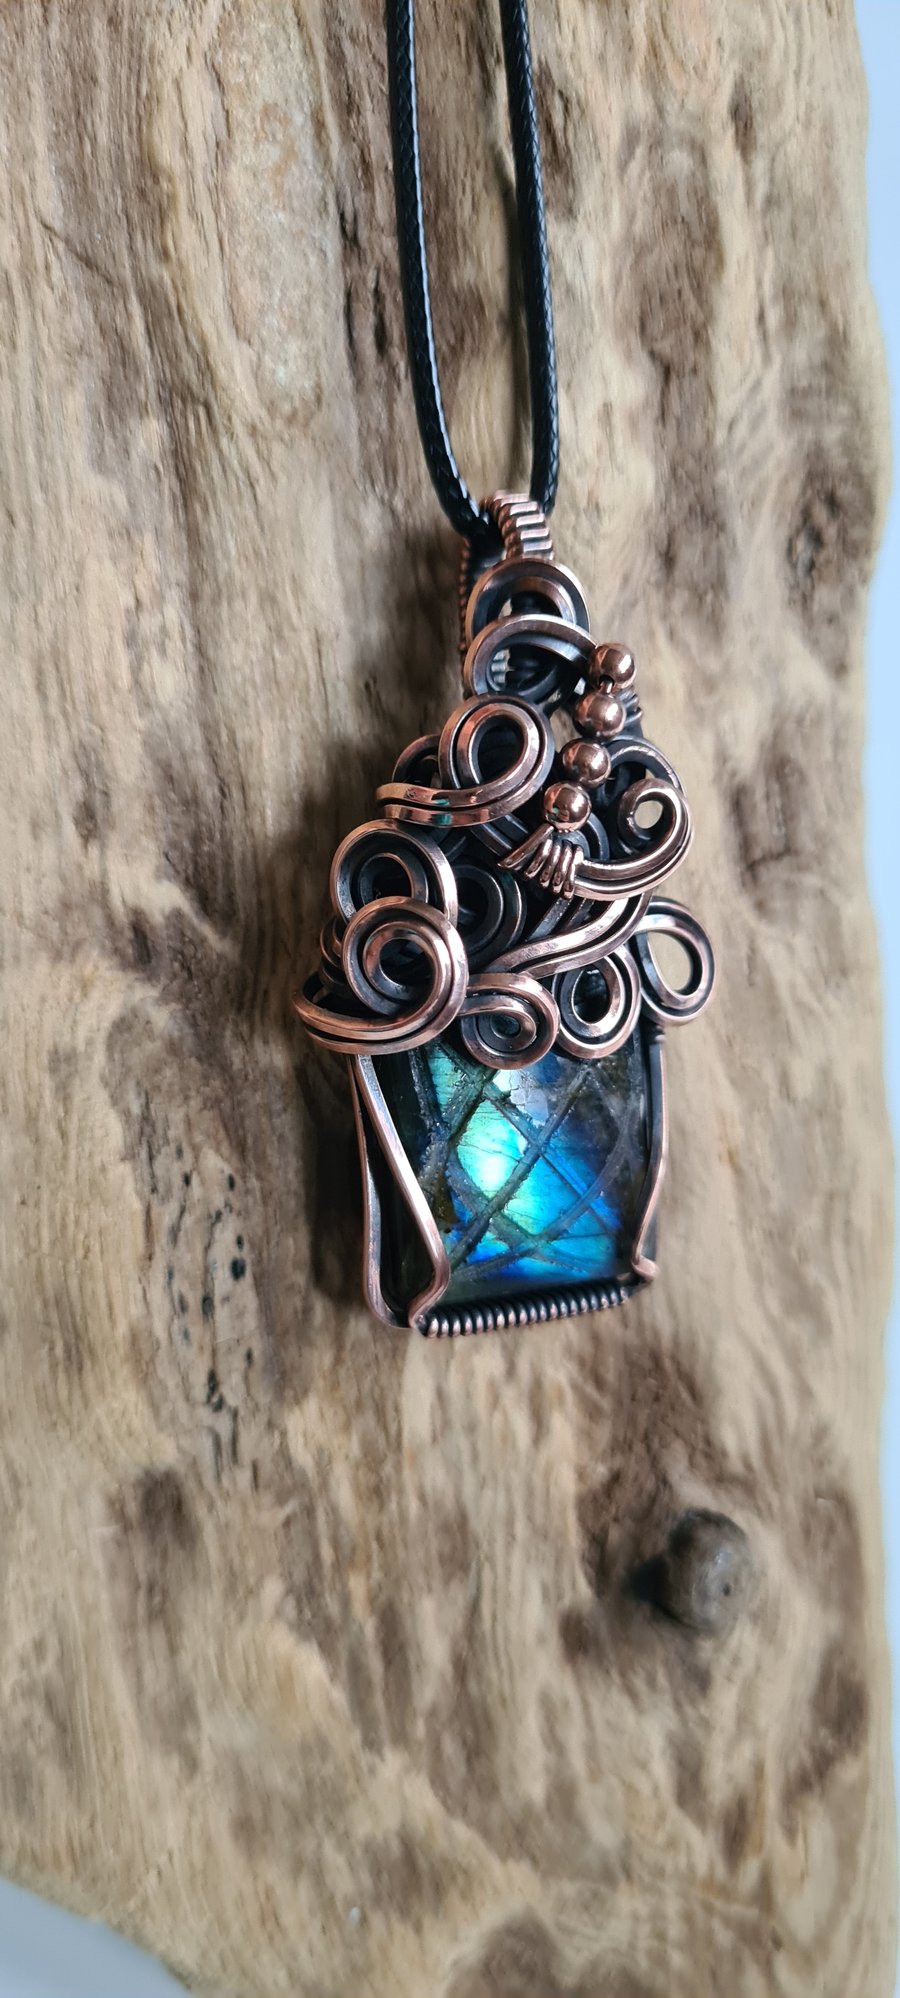 Handmade Natural Carved Labradorite & Copper Pendant Necklace Crystal Jewellery